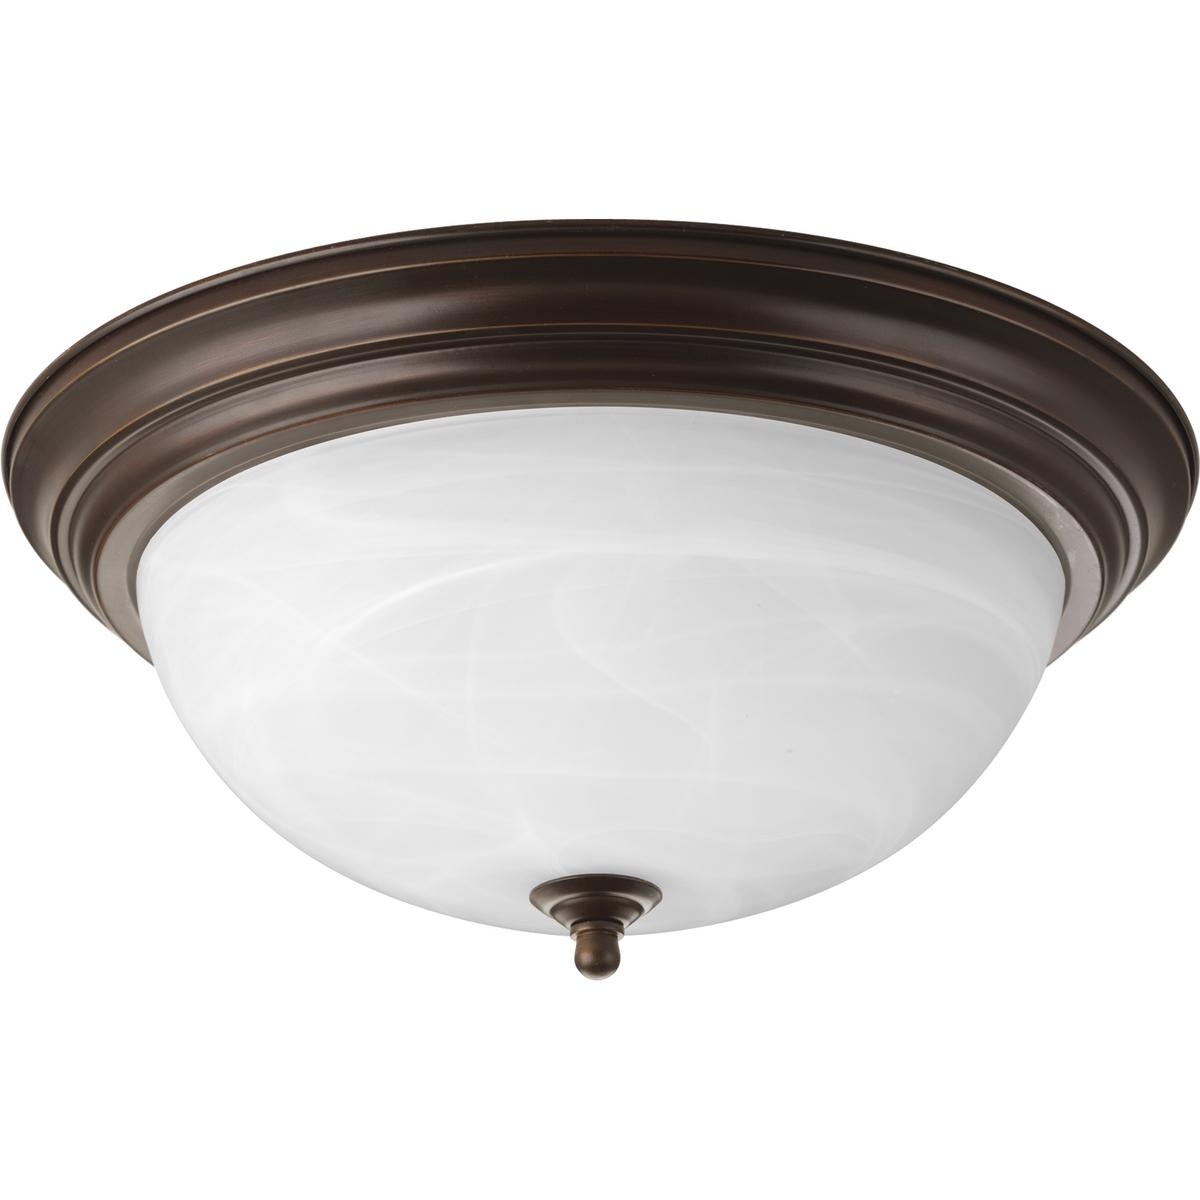 Hubbell P3926-20 Three-light flush mount with dome shaped alabaster glass, solid trim and decorative knobs. Center lock-up with matching finial. Antique Bronze finish.  ; Antique Bronze finish. ; Alabaster Glass. ; Decorative details.